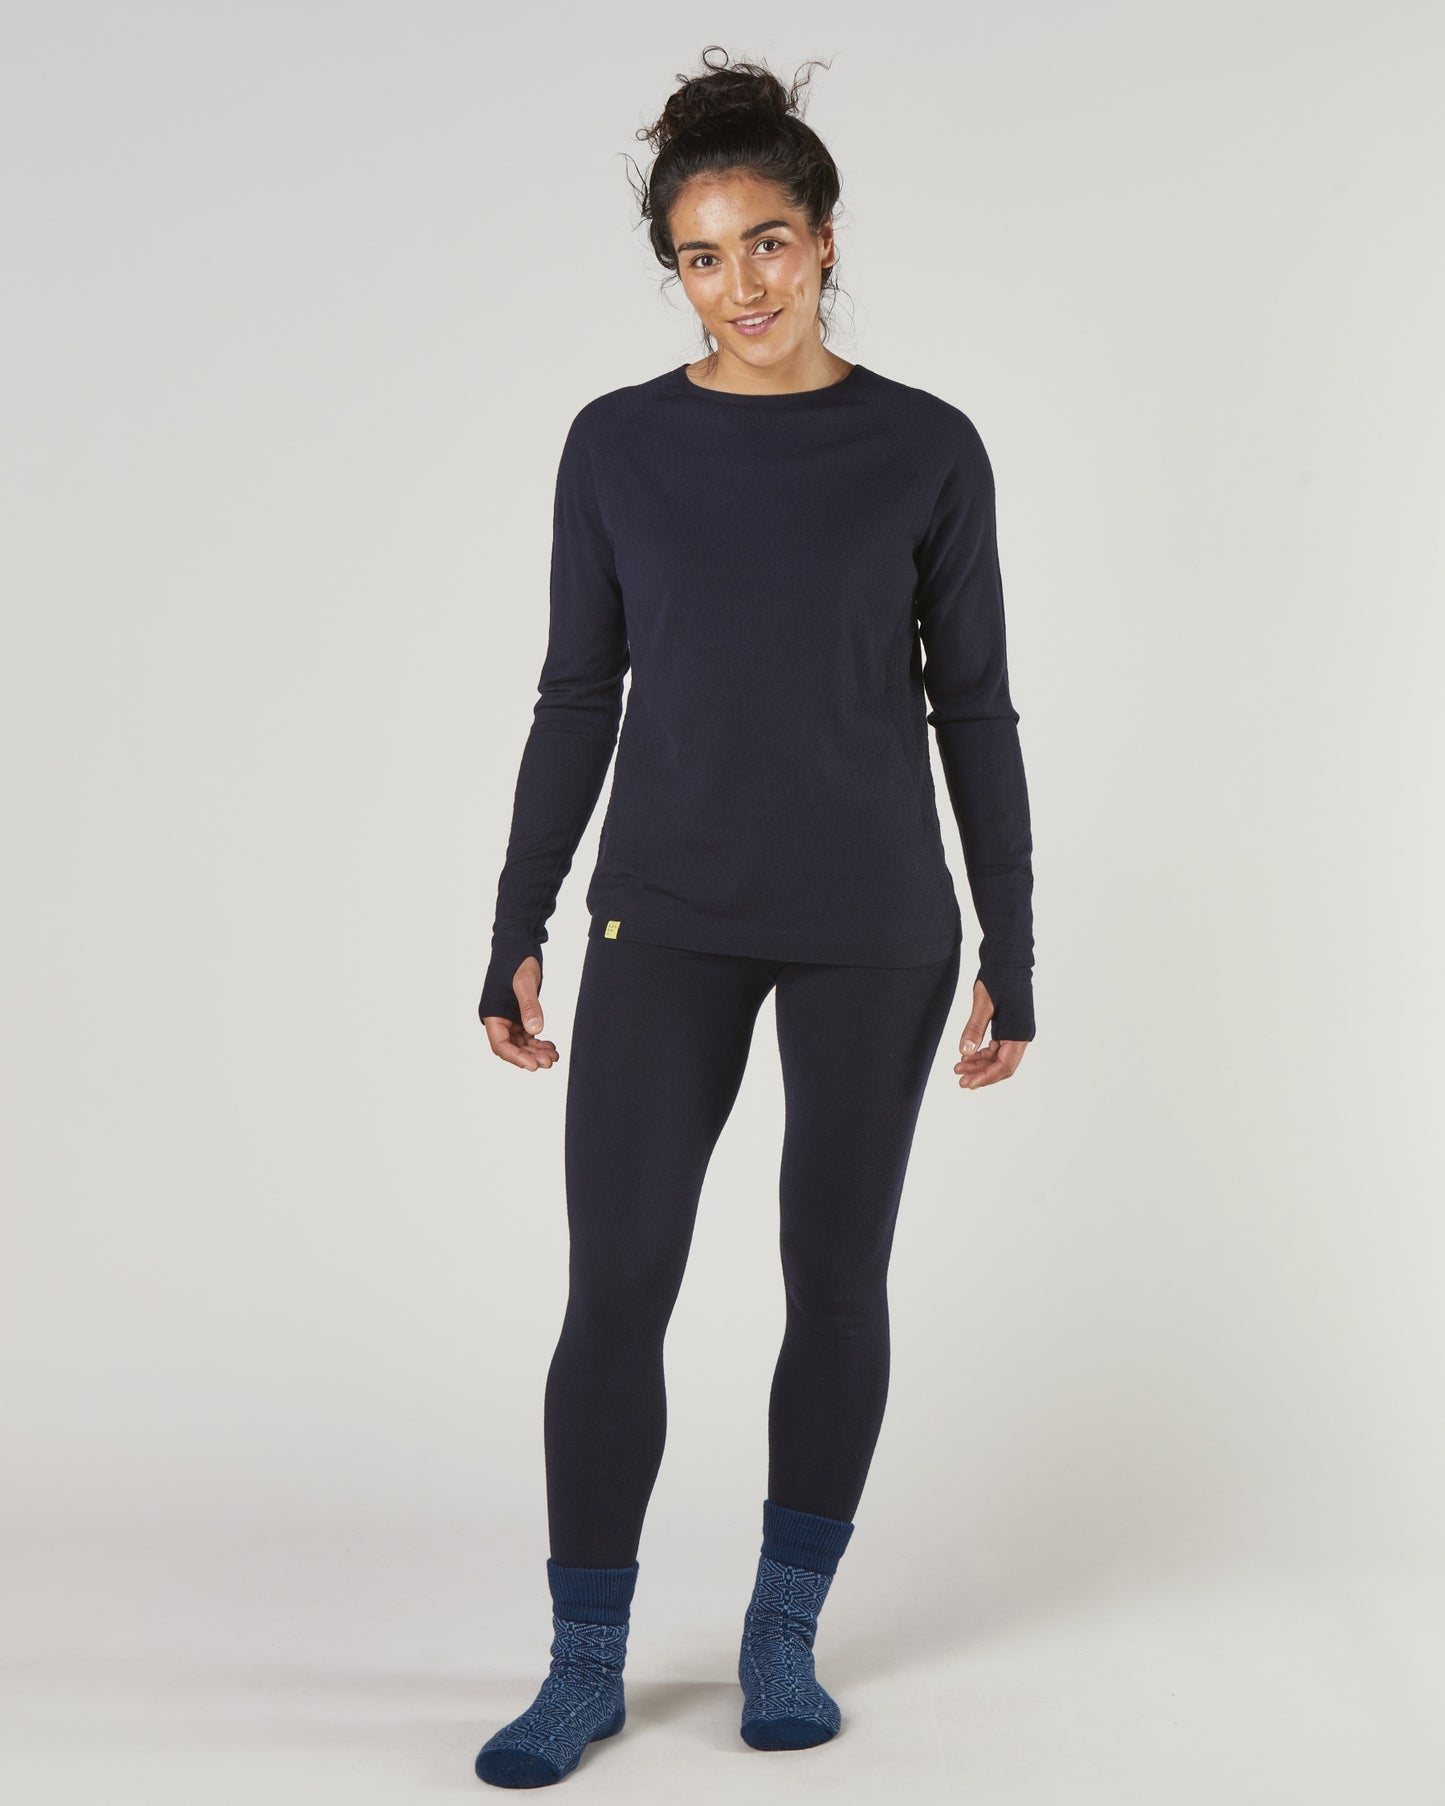 Linton Textured Merino Base Layer - Relaxed Fit